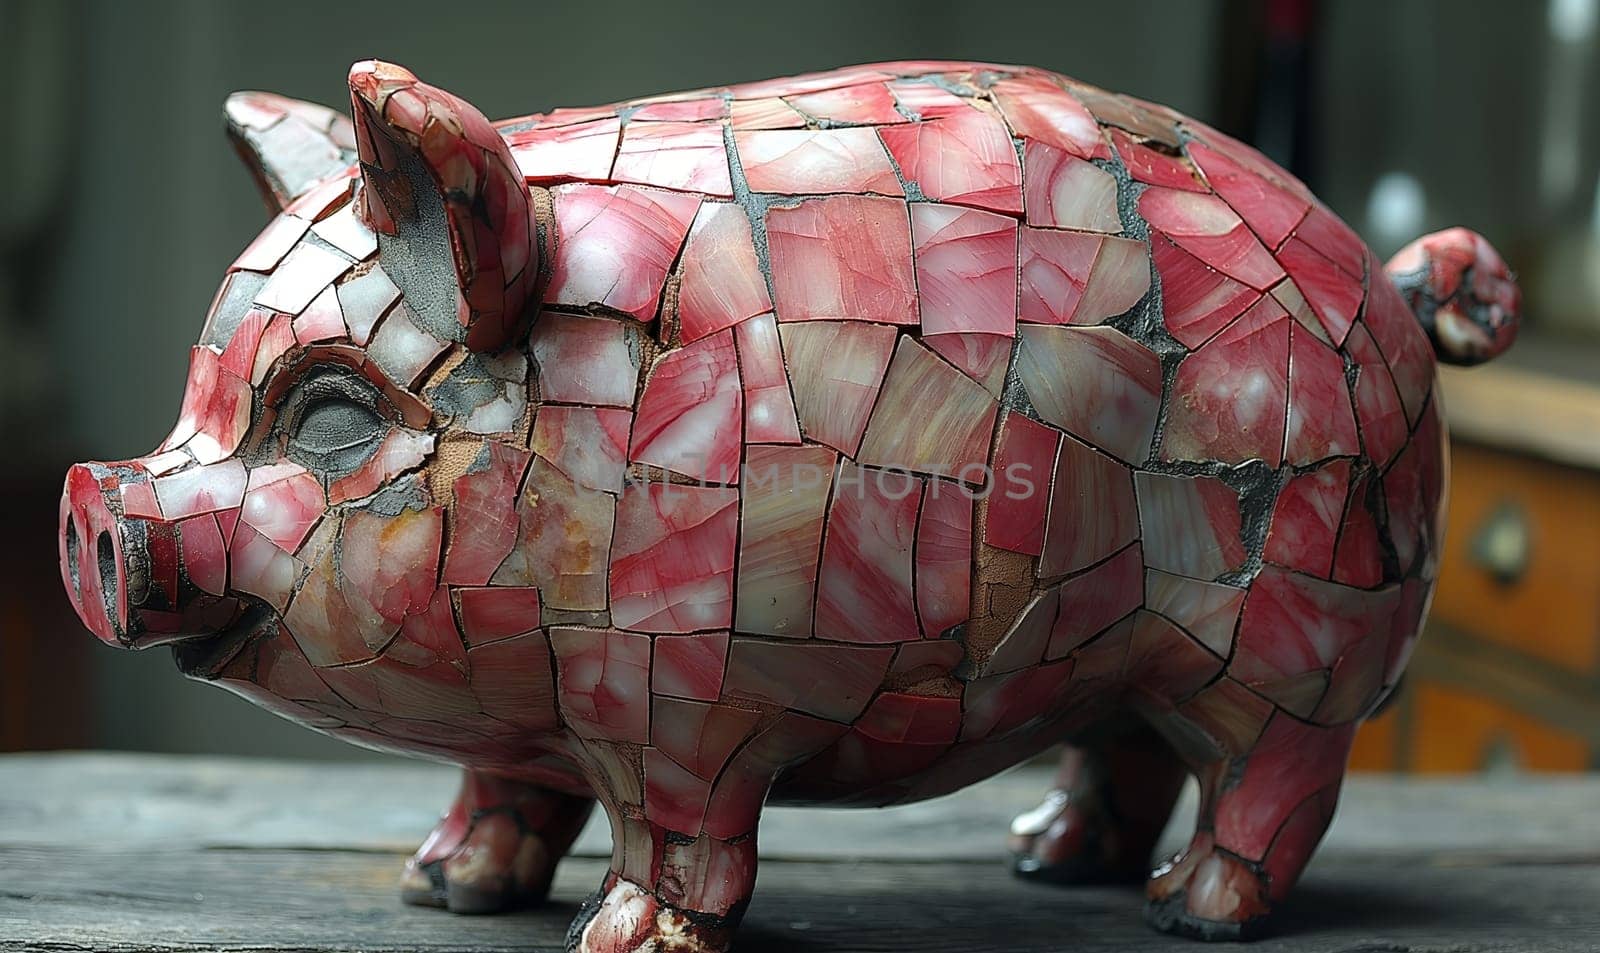 Pig sculpture crafted from broken tiles displayed on a table.